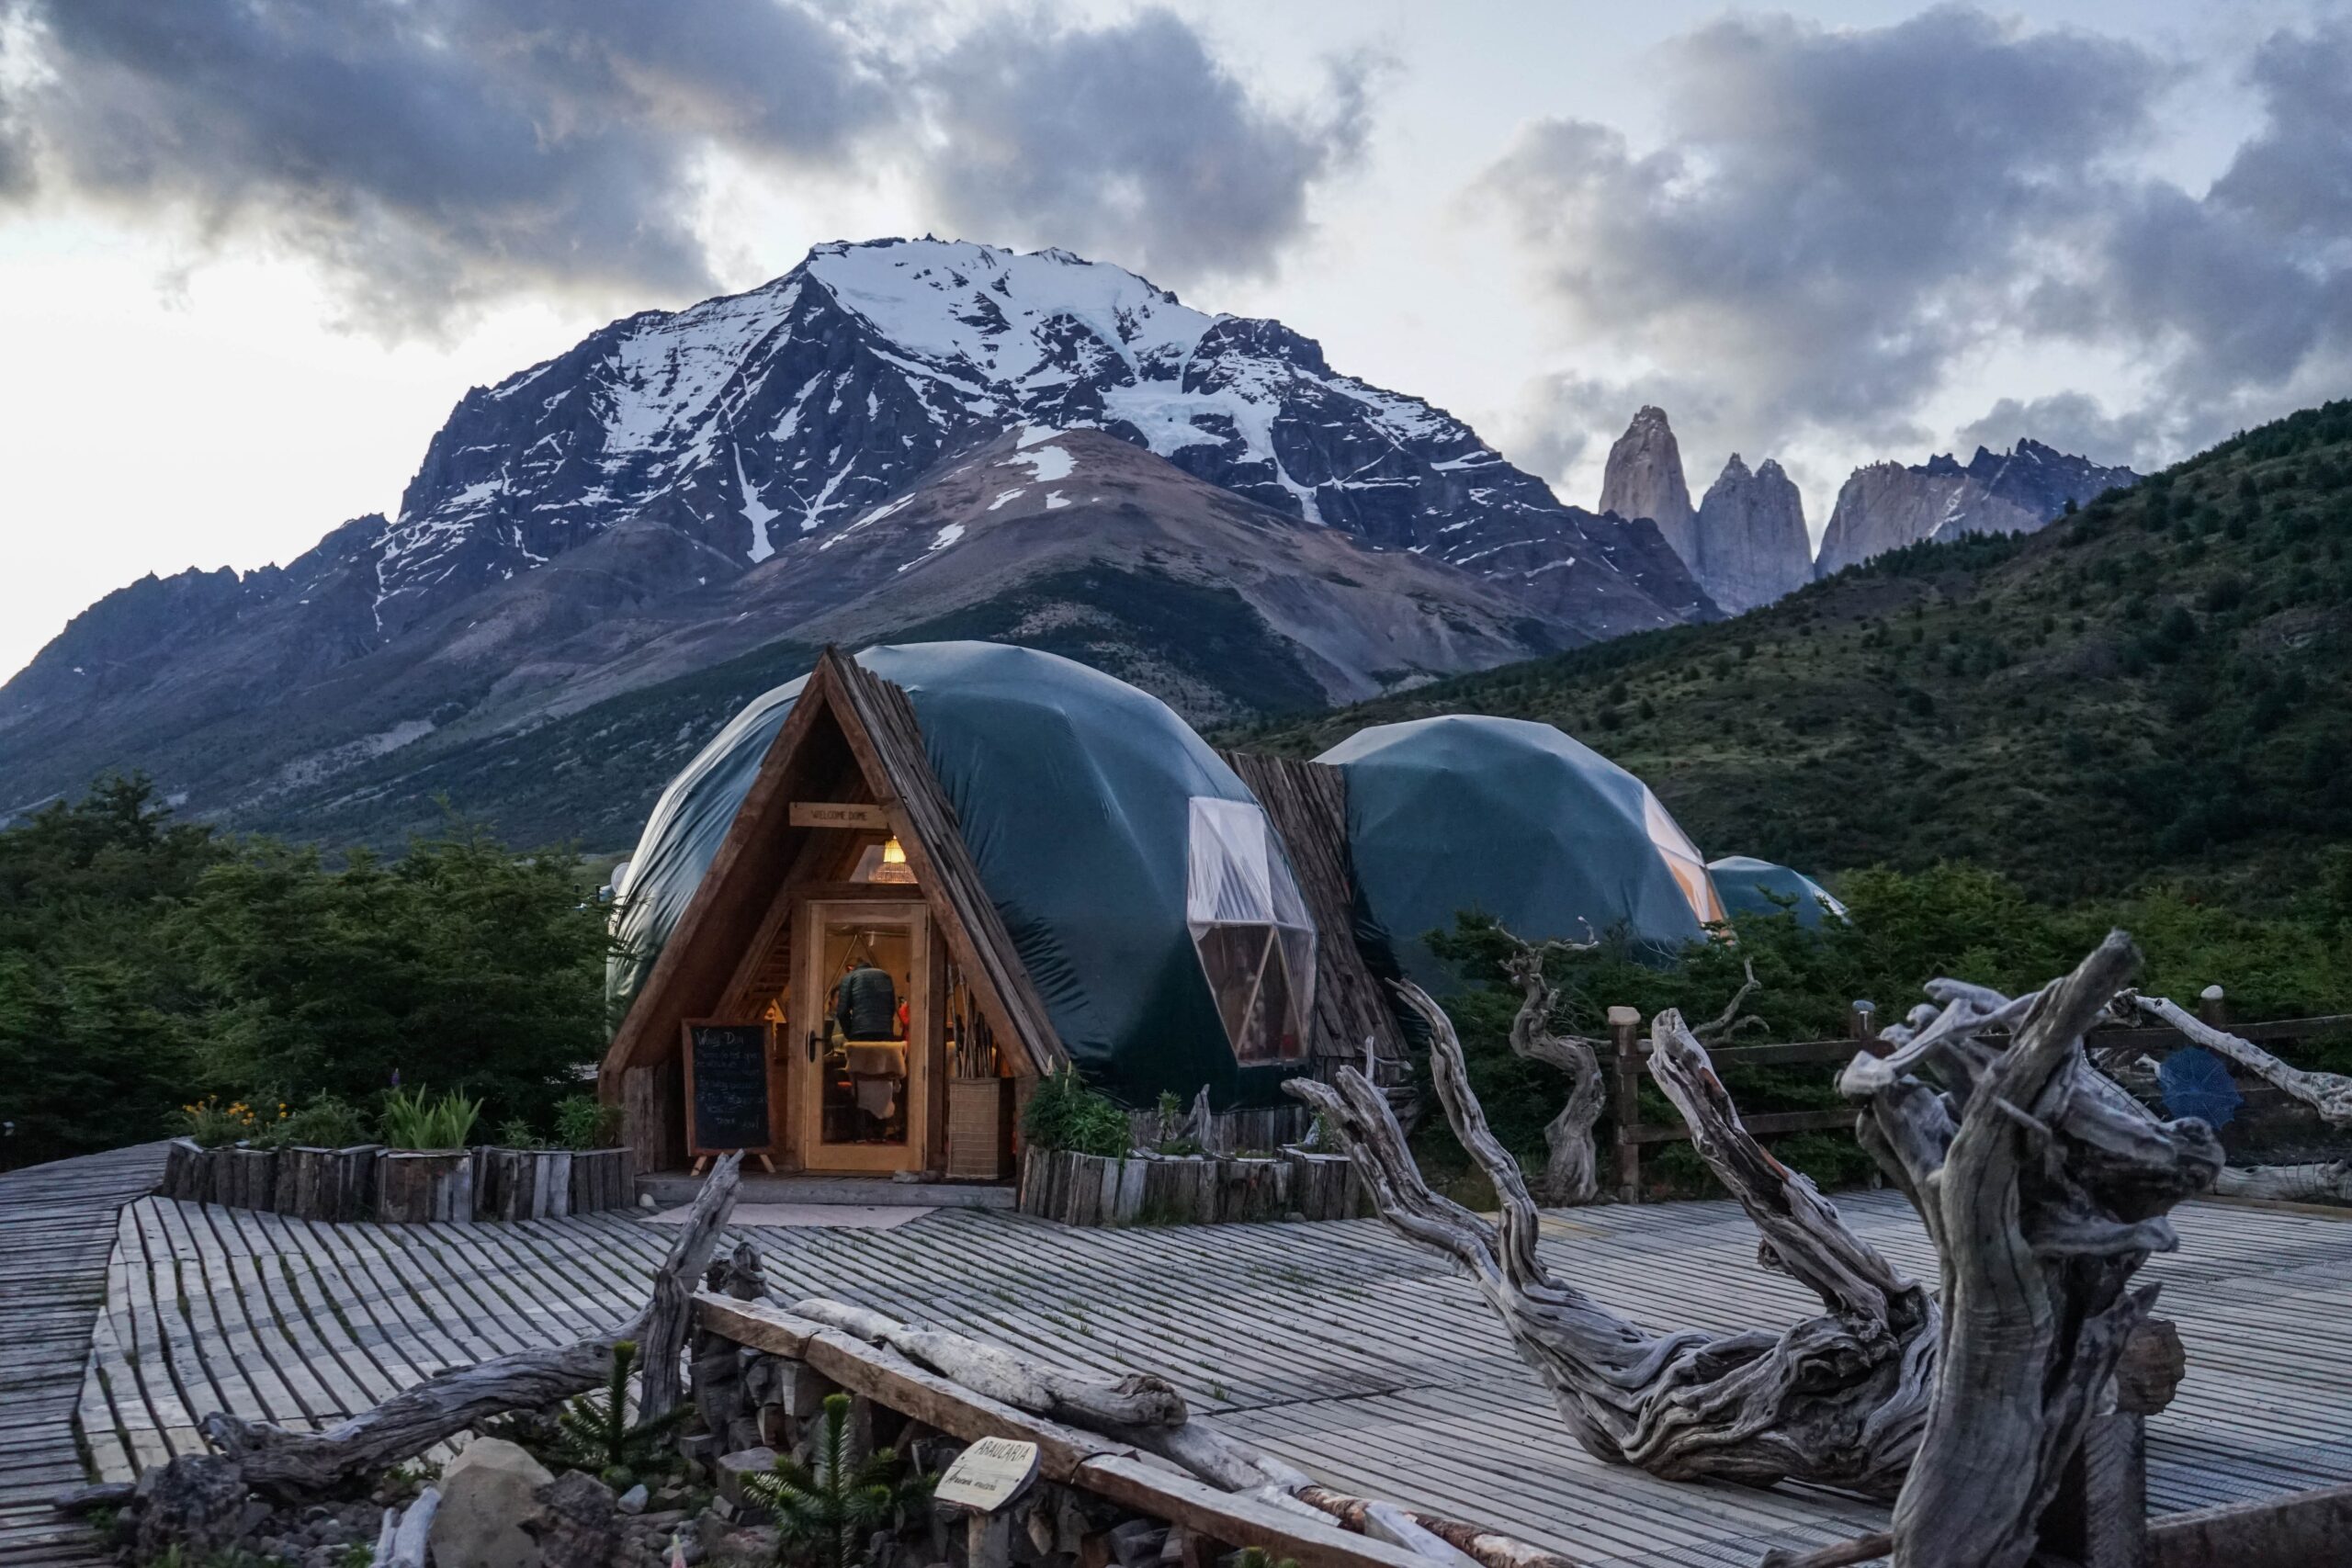 a geodesic cabin with a beautiful mountain view for a glamping or luxury camping adventure